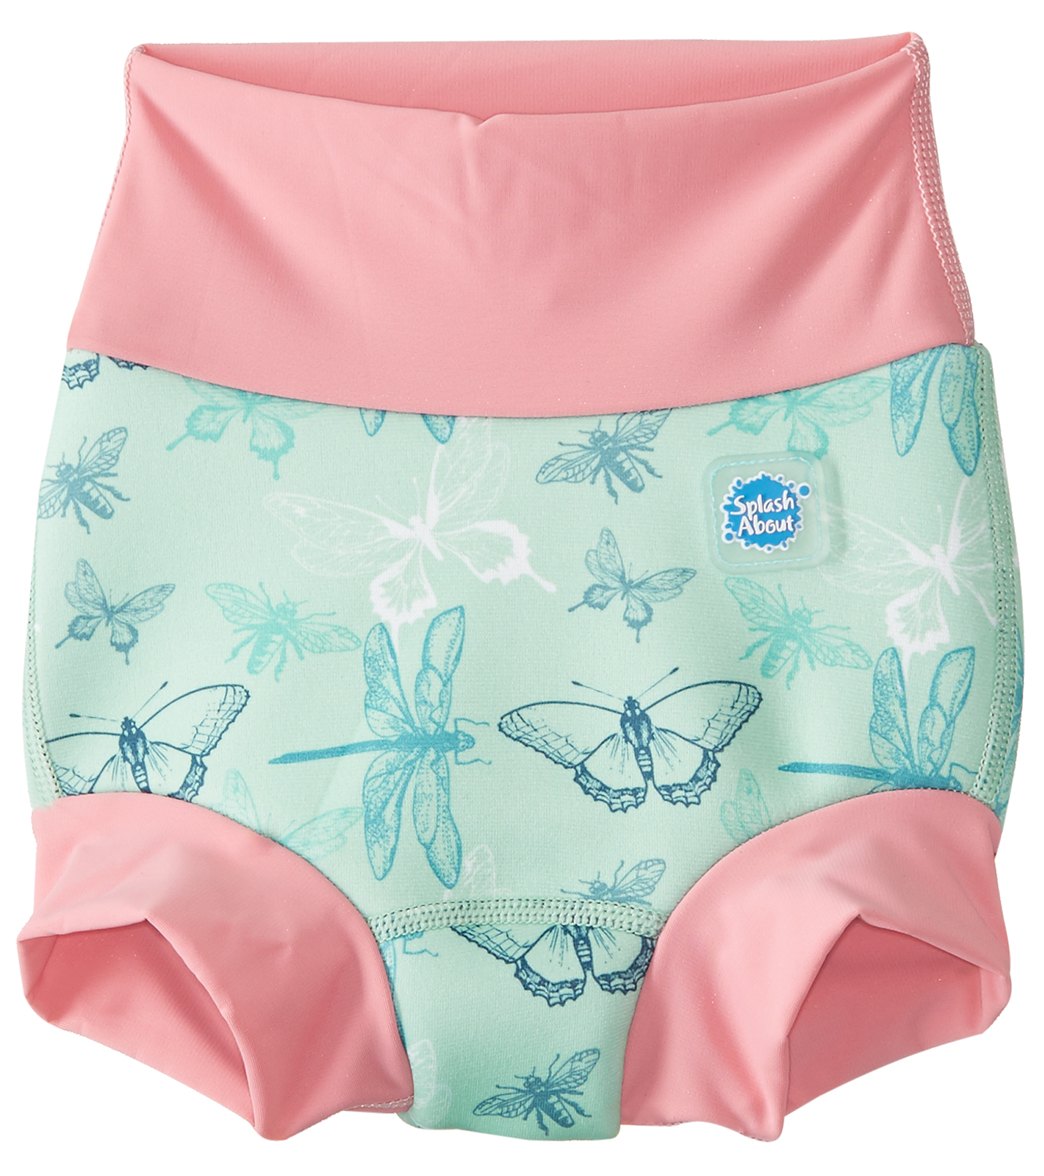 Splash About New Improved Happy Nappy Swim Diaper 3 Months-3T - Dragonfly Medium 3-6 Months - Swimoutlet.com